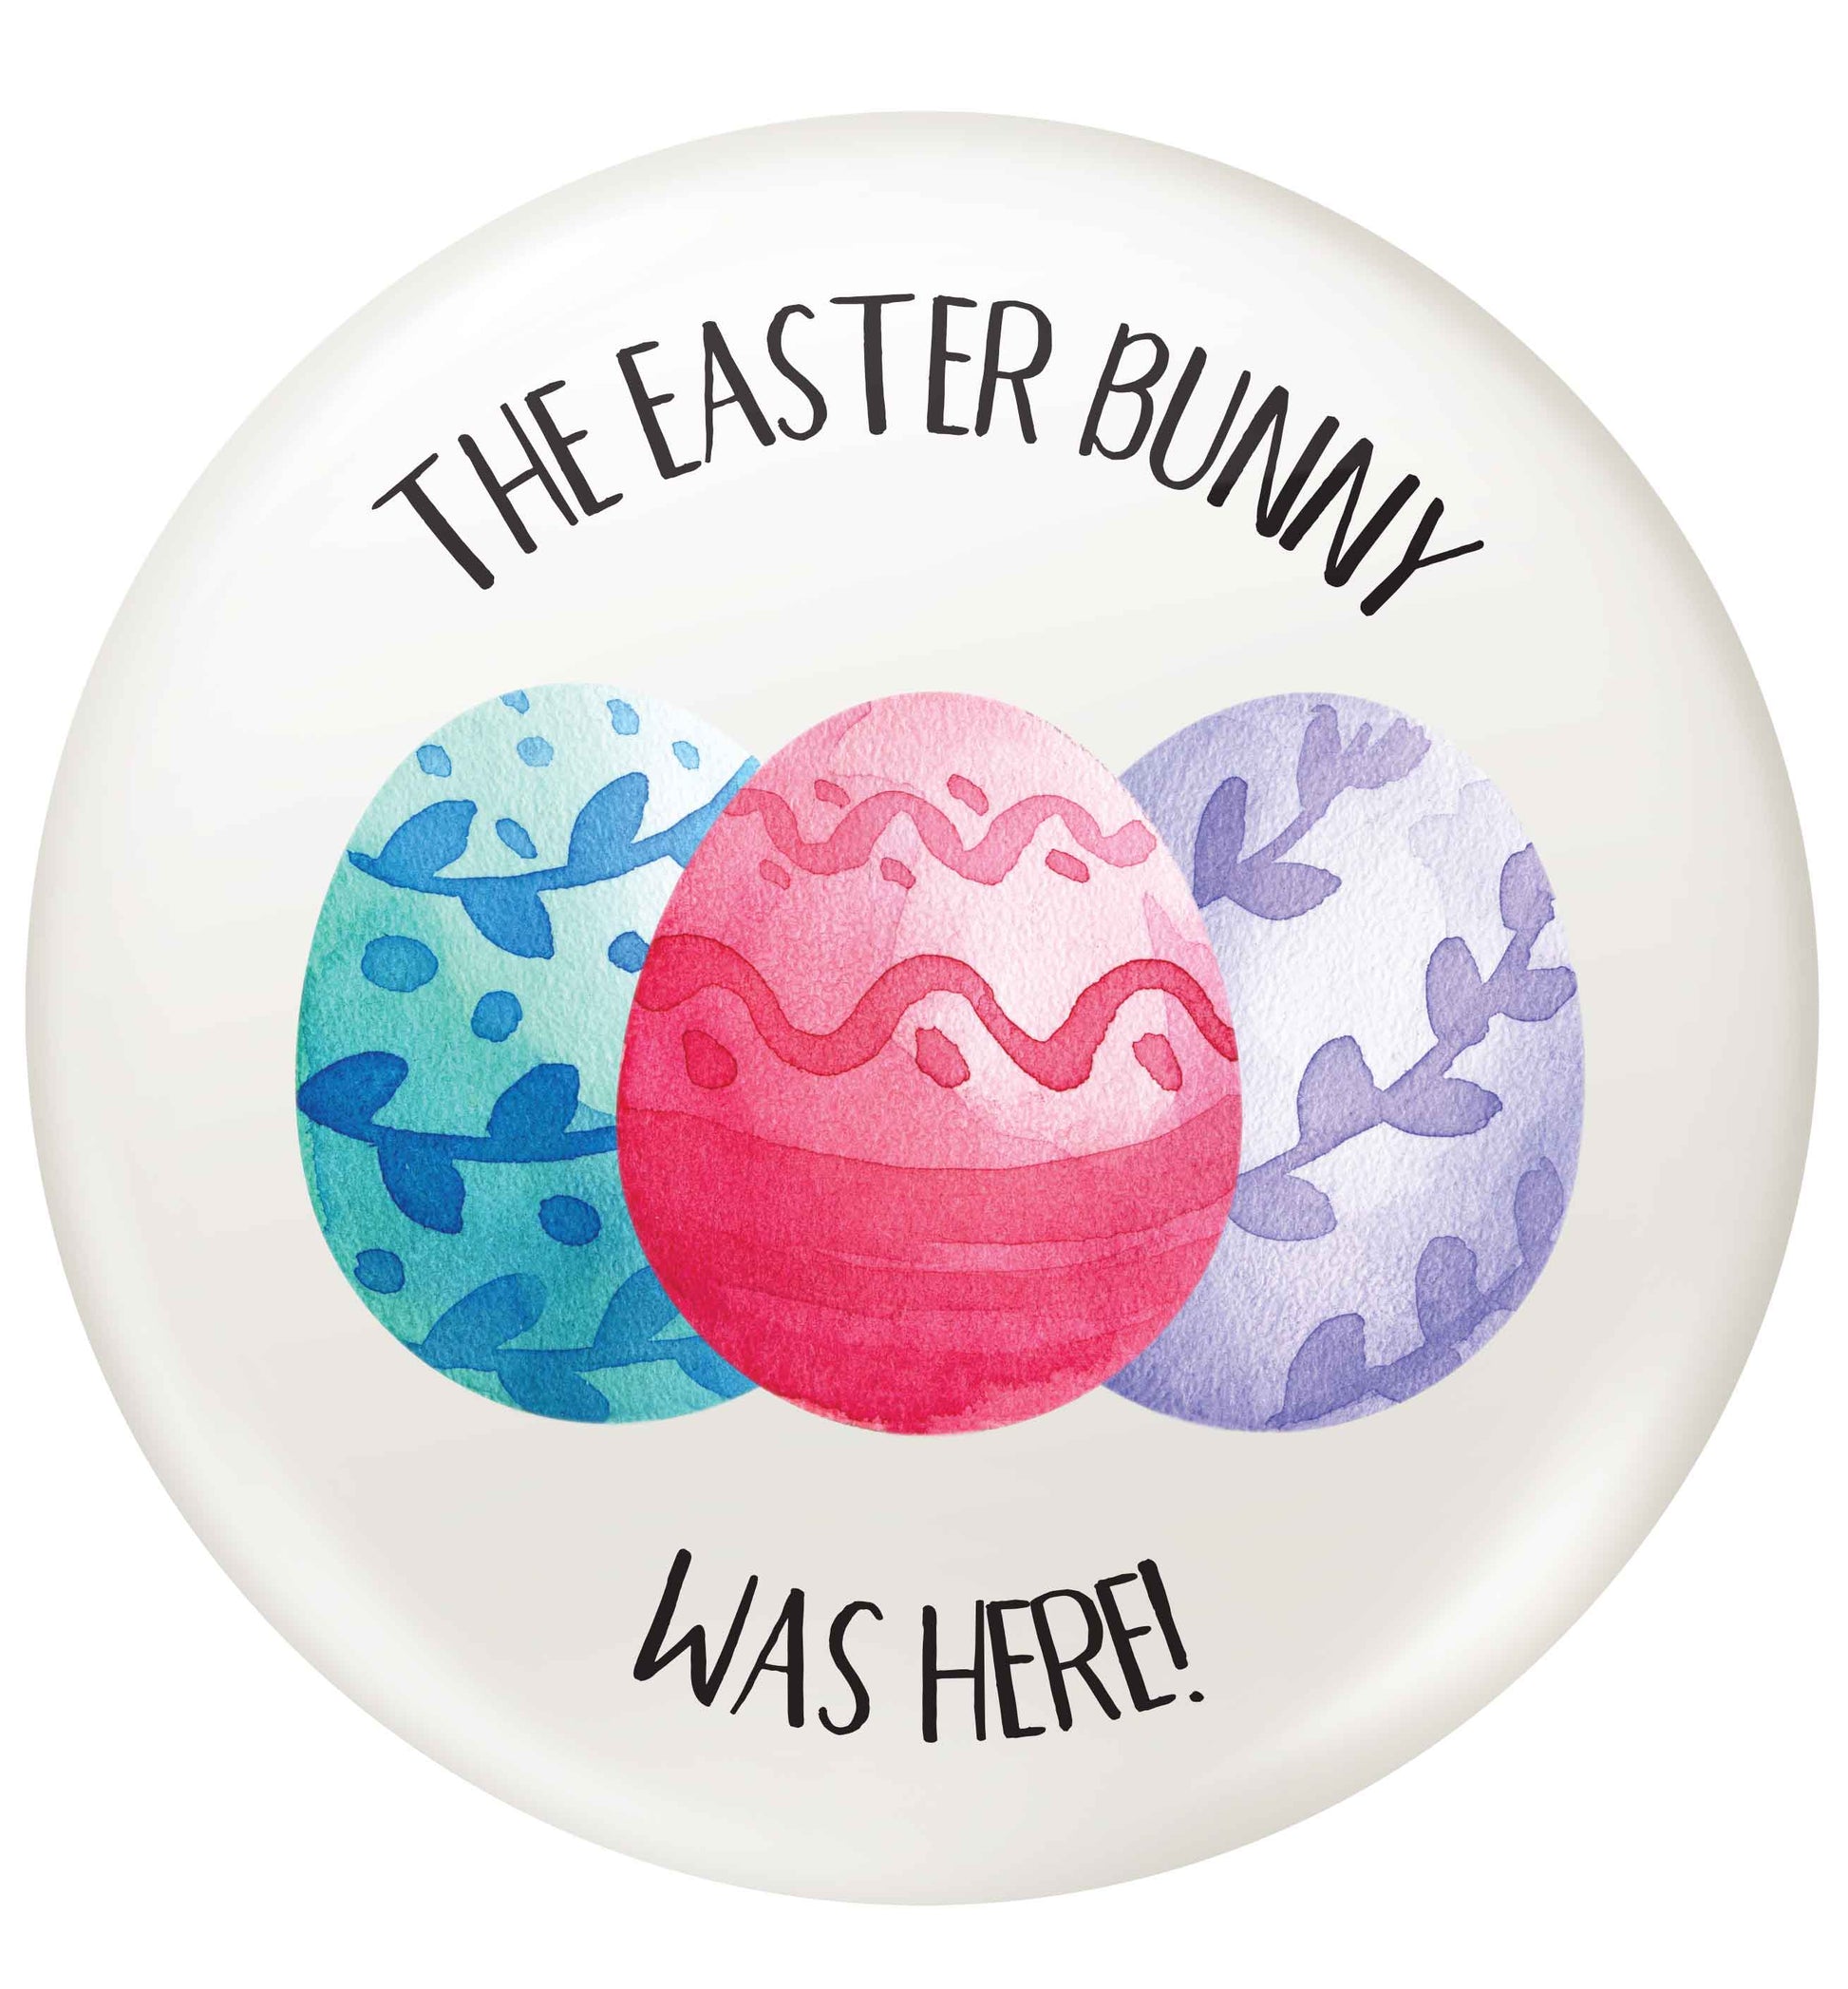 The Easter bunny was here small 25mm Pin badge